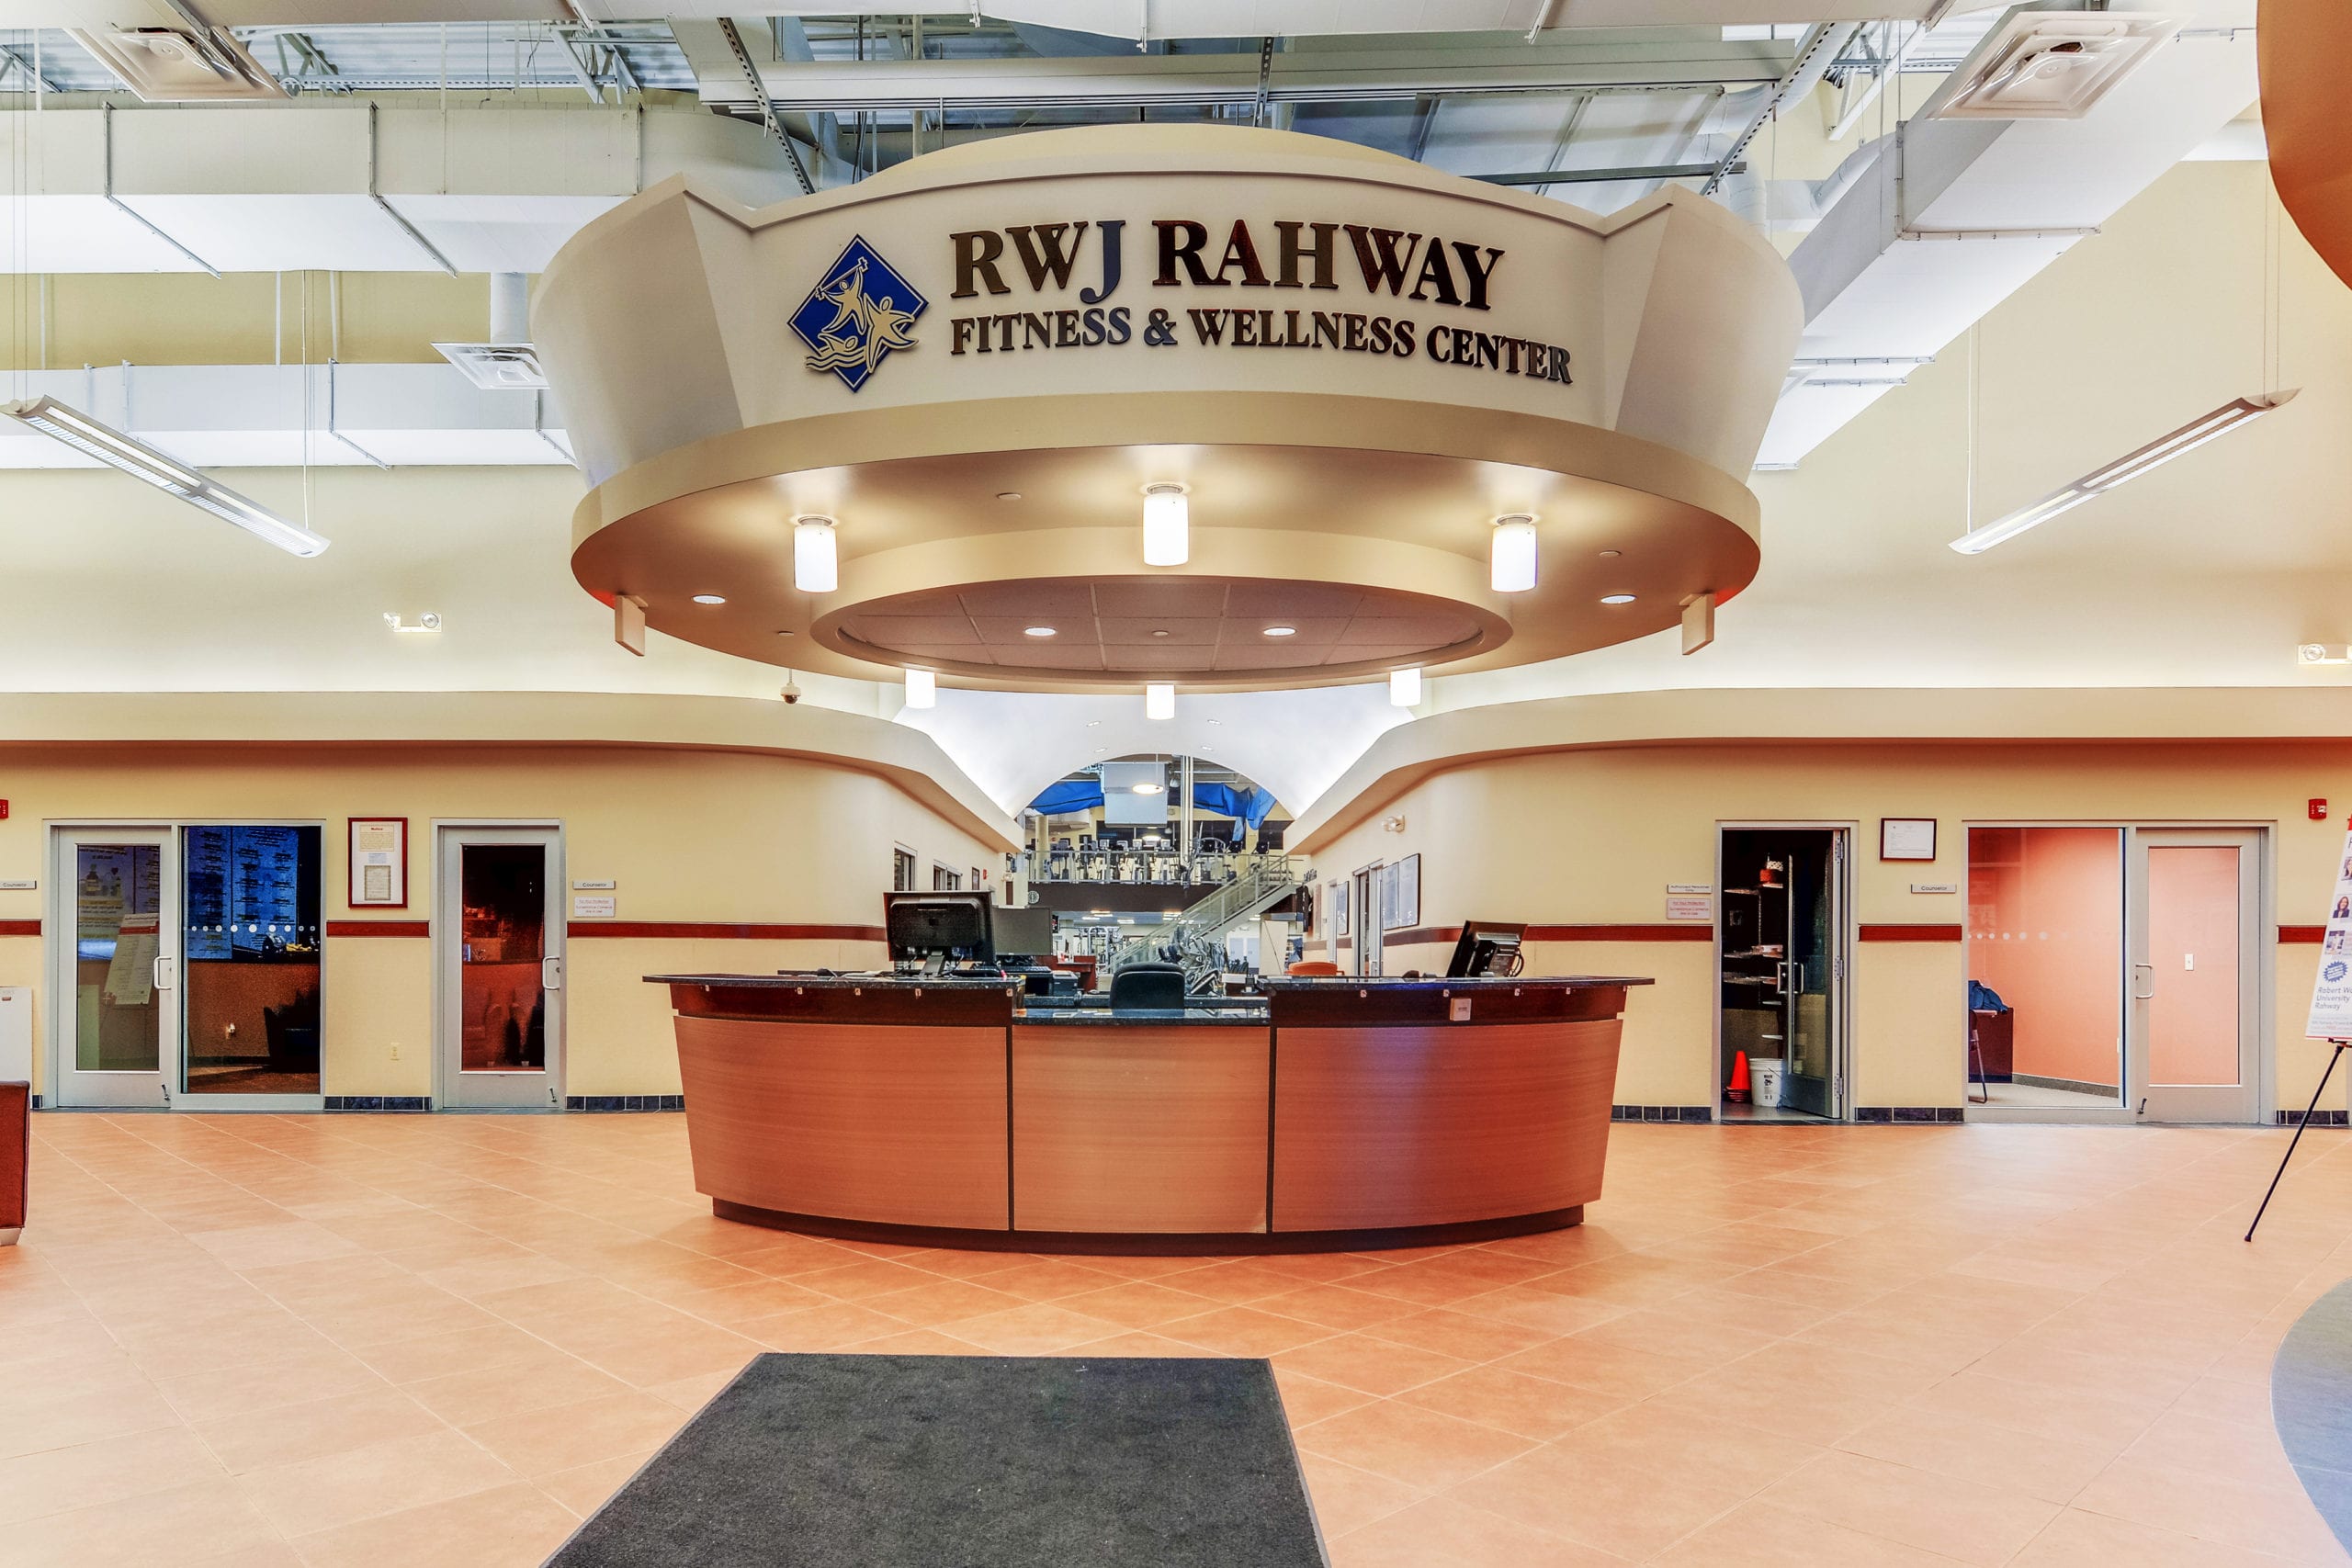 Schedule Tour - RWJ RAHWAY FITNESS & WELLNESS